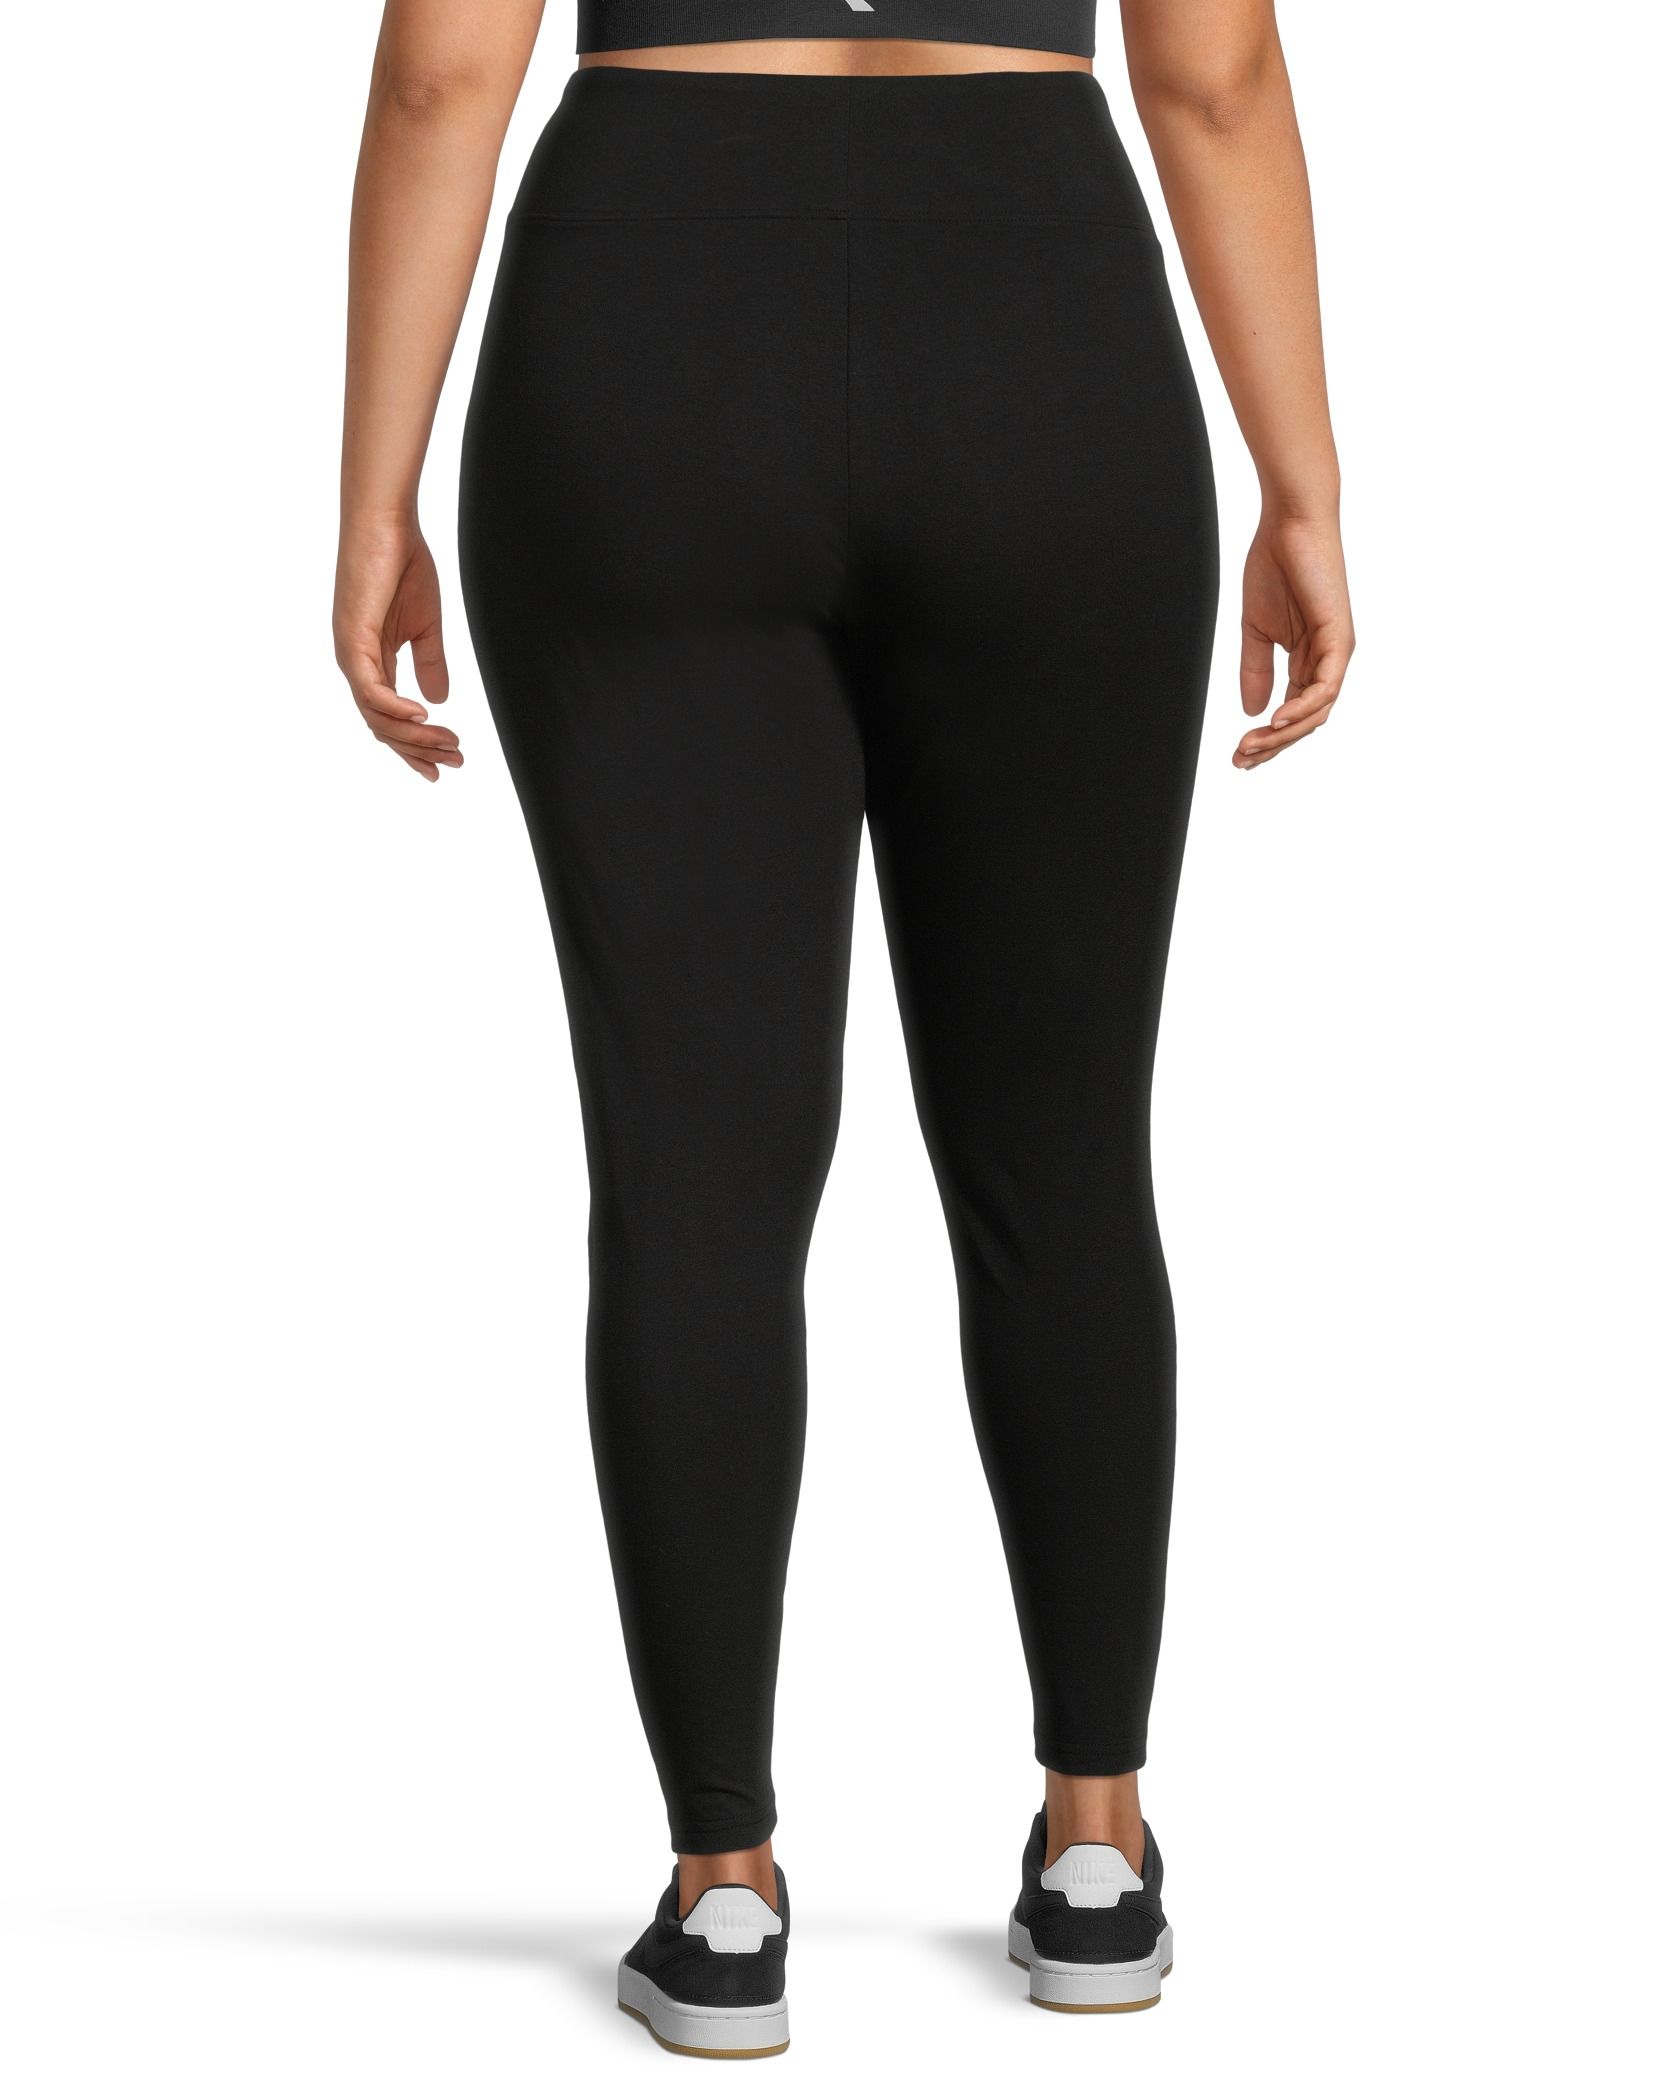 icyzone Yoga Pants for Women - High Waisted Workout Leggings with